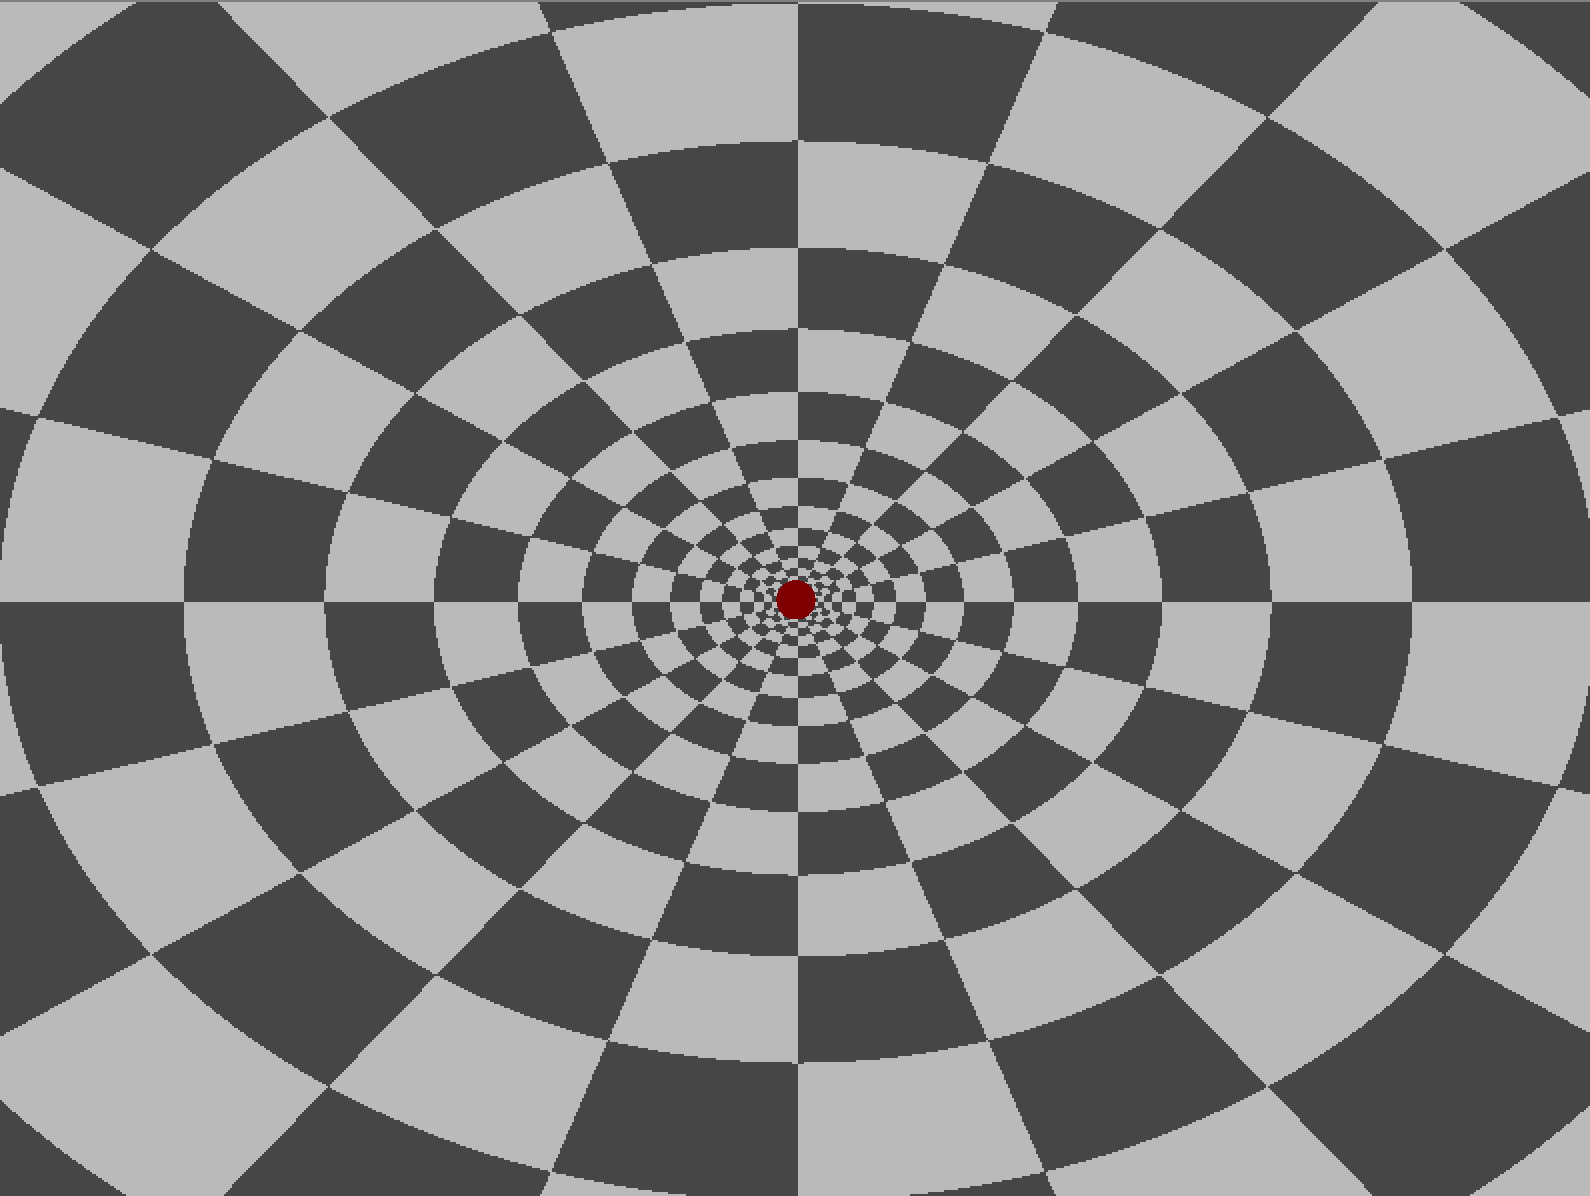 ./imgs/flickering-checkerboard.png